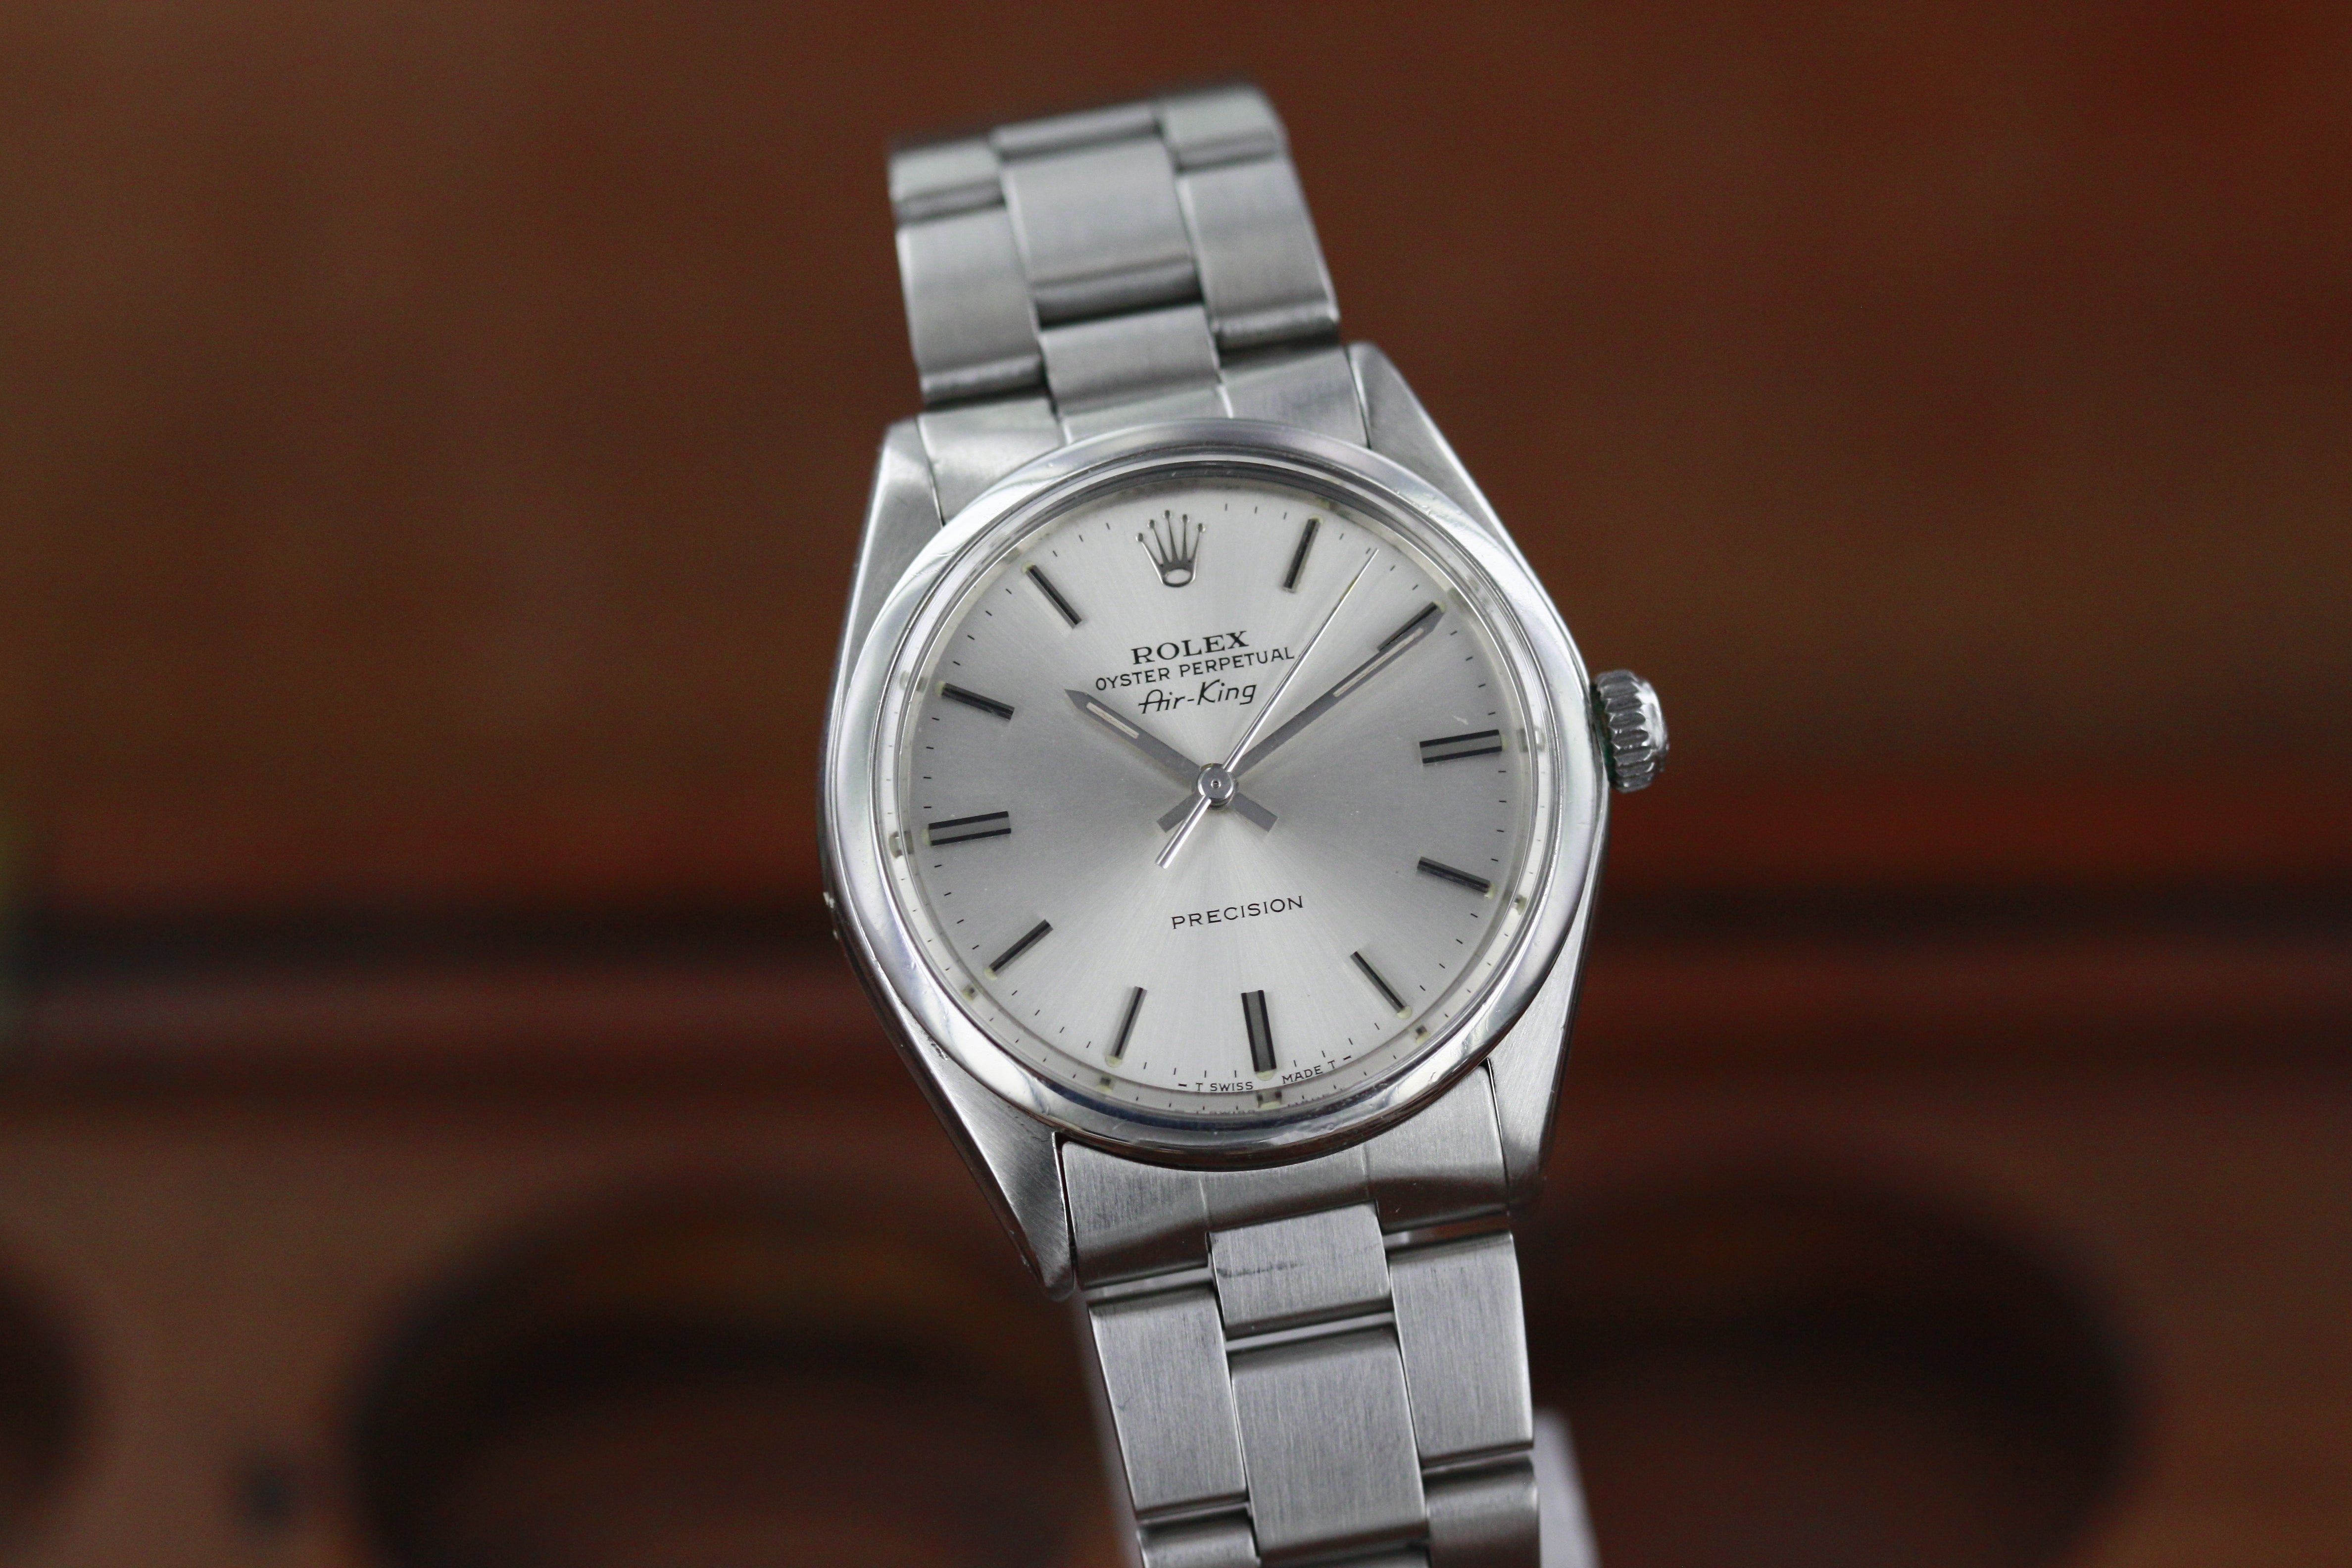 Rolex Oyster Perpetual Air King Ref .5500 White dial anno 1979